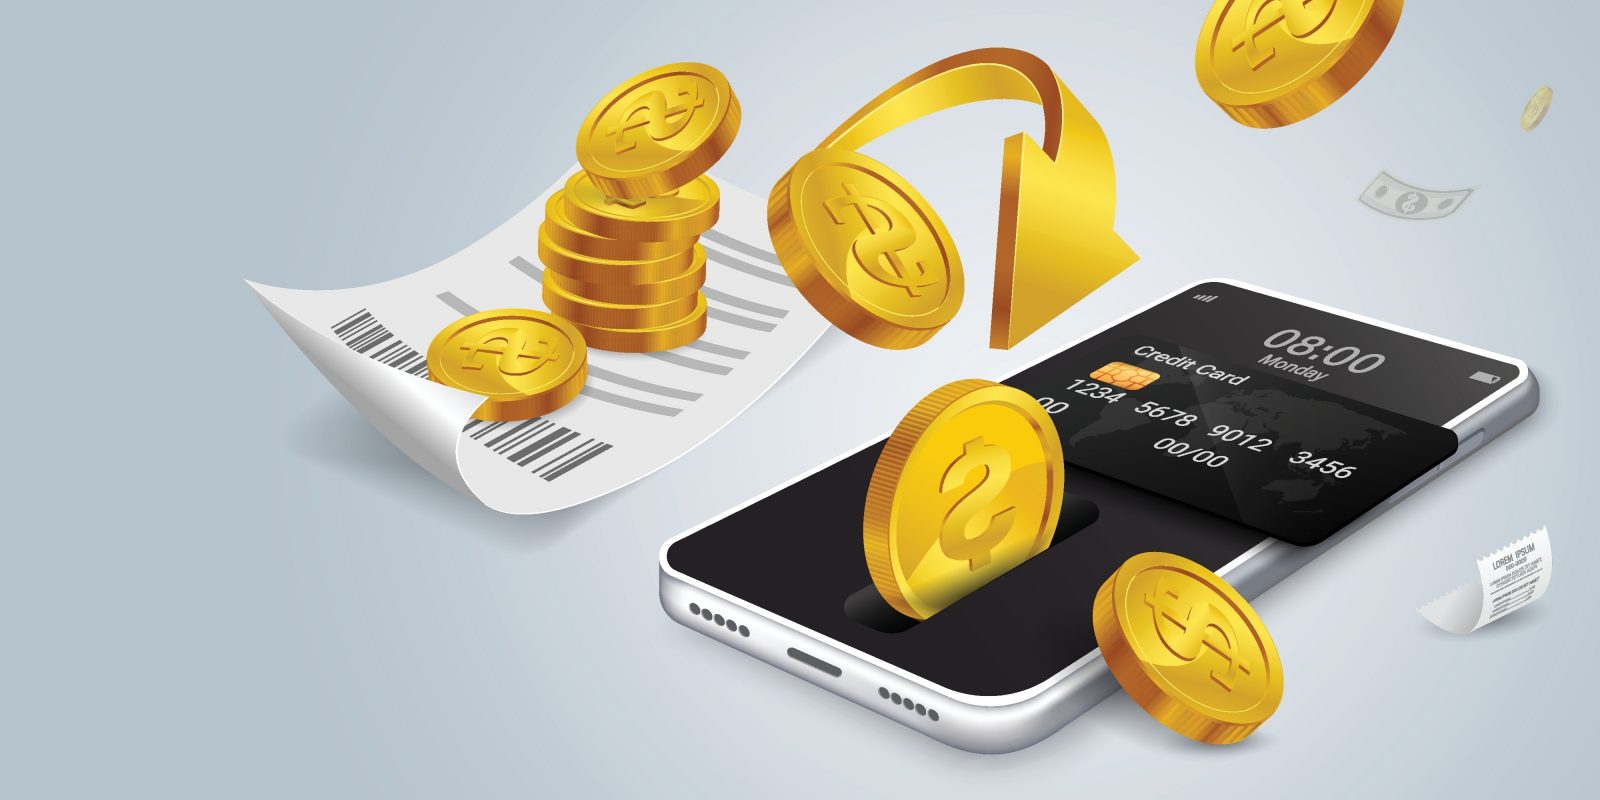 payment illustration Mobile money transfer.Coin flow into the smartphone and credit card on top.Paying bills and getting cash back on spending.pile of coins with coins flowing into the phone.